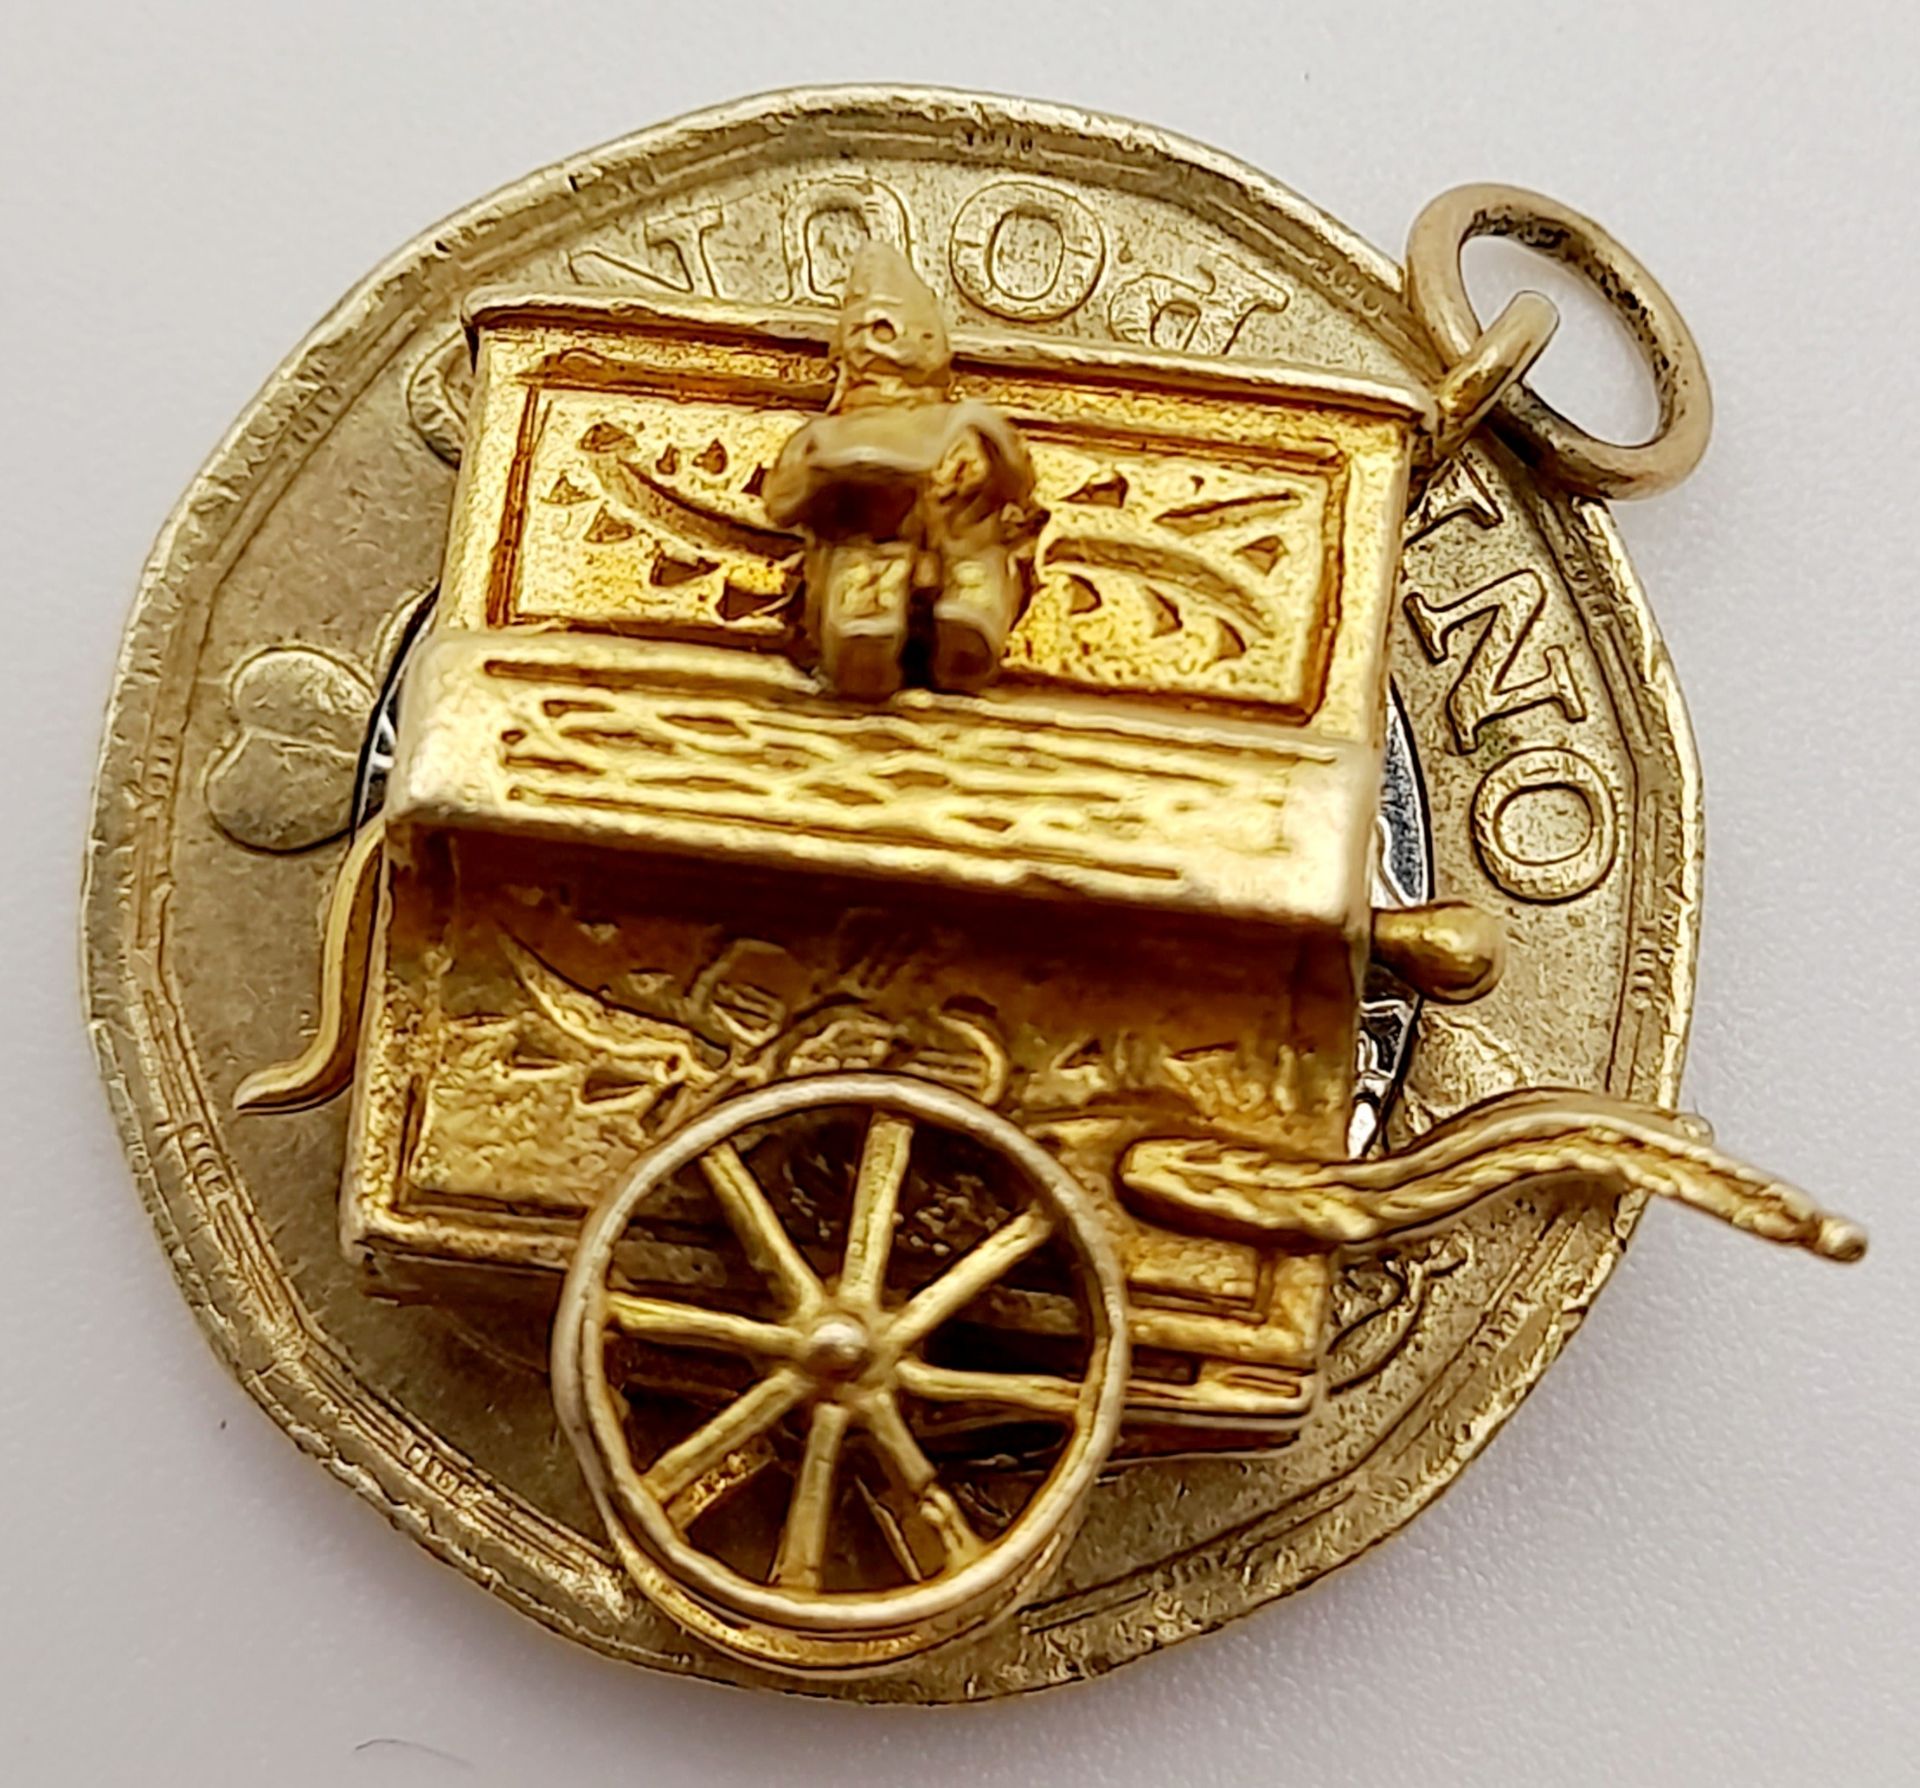 A 9K YELLOW GOLD ORGAN GRINDER AND MONKEY CHARM WITH MOVING PARTS. 2.2cm x 2.5cm, 5.2g weight. - Image 5 of 6